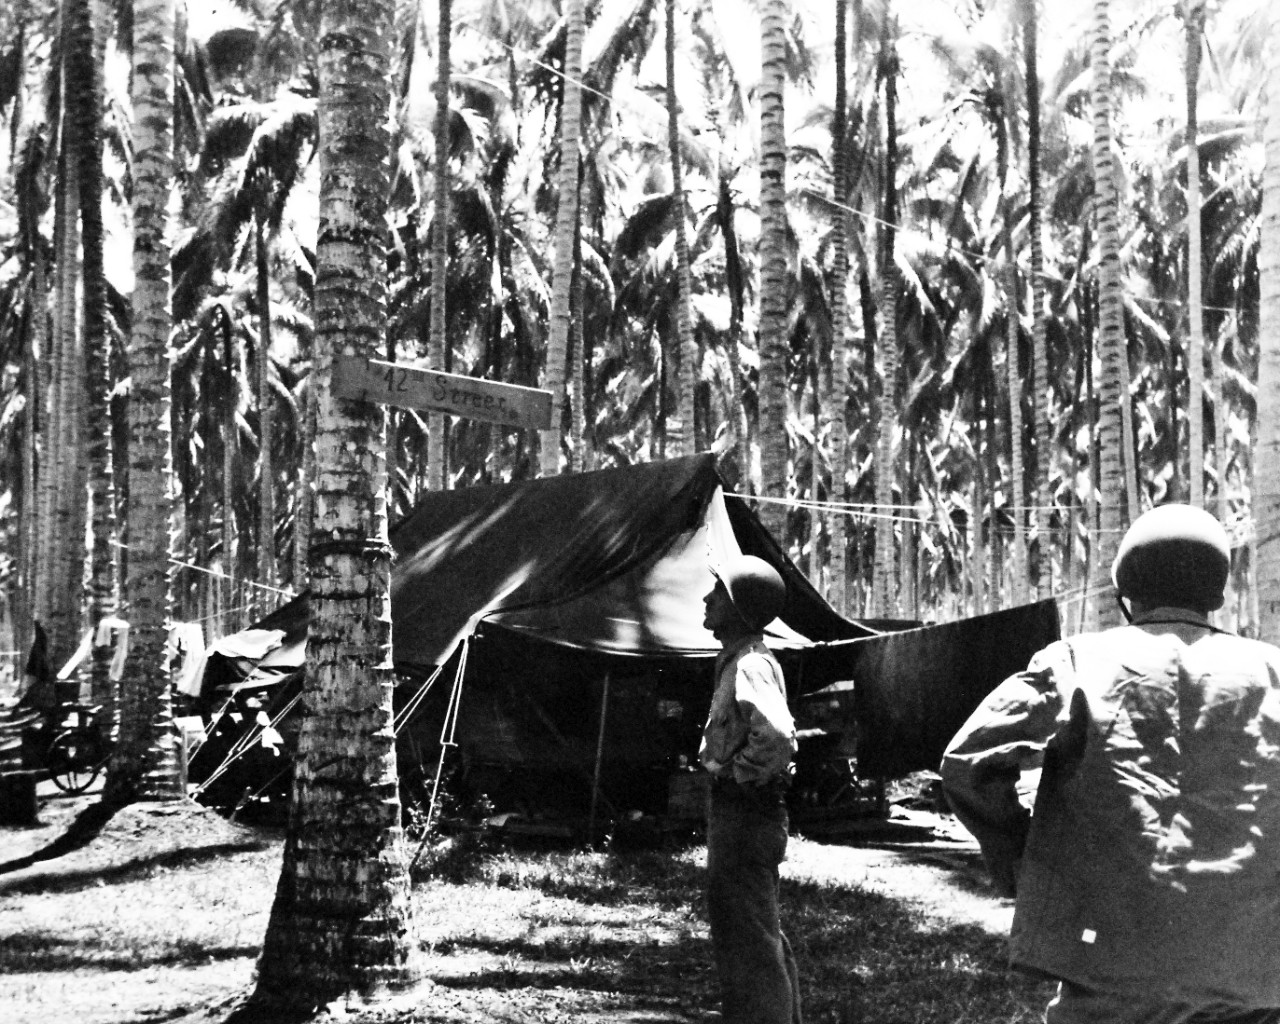 80-G-27200: Guadalcanal Campaign, August 1942 to February 1943.  A A Sign says “42nd Street”, but it is a long way from New York City’s Times Square.  The sign was posted at a U.S. Marine Camp on Guadalcanal, November 30, 1942.    Official U.S. Navy photograph, now in the collections of the National Archives.  (2016/12/06).